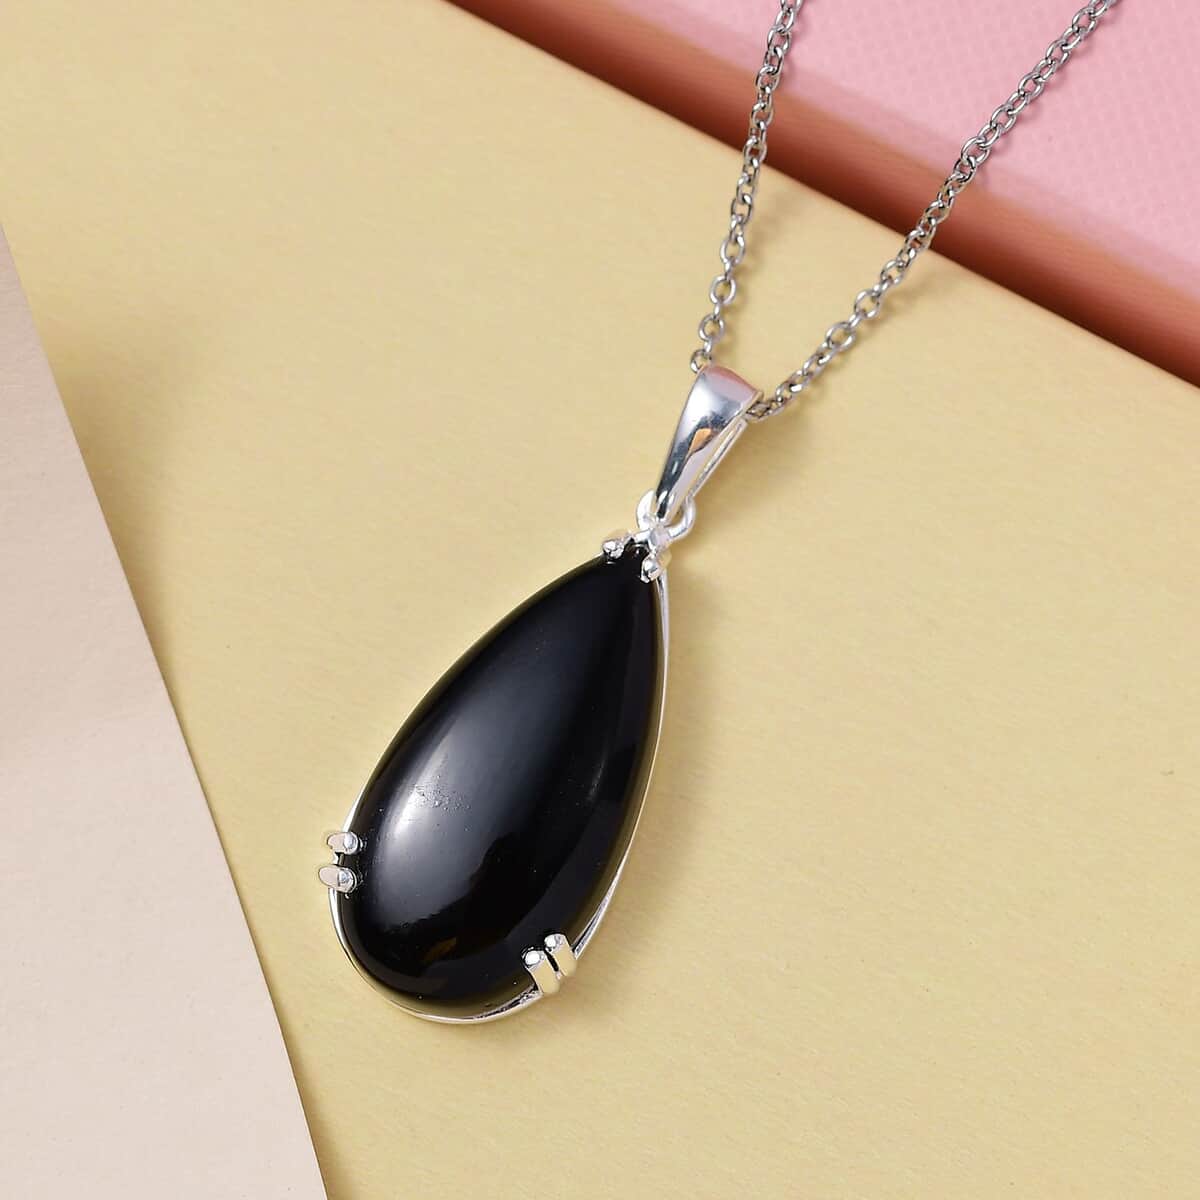 Black Onyx Pendant Necklace 20 Inches in Sterling Silver, Black Teardrop Pendant Necklaces for Women, Silver Boho Pendant - December Birthstone Necklace with Stainless Steel Chain 20 Inches 20.00 ctw image number 4